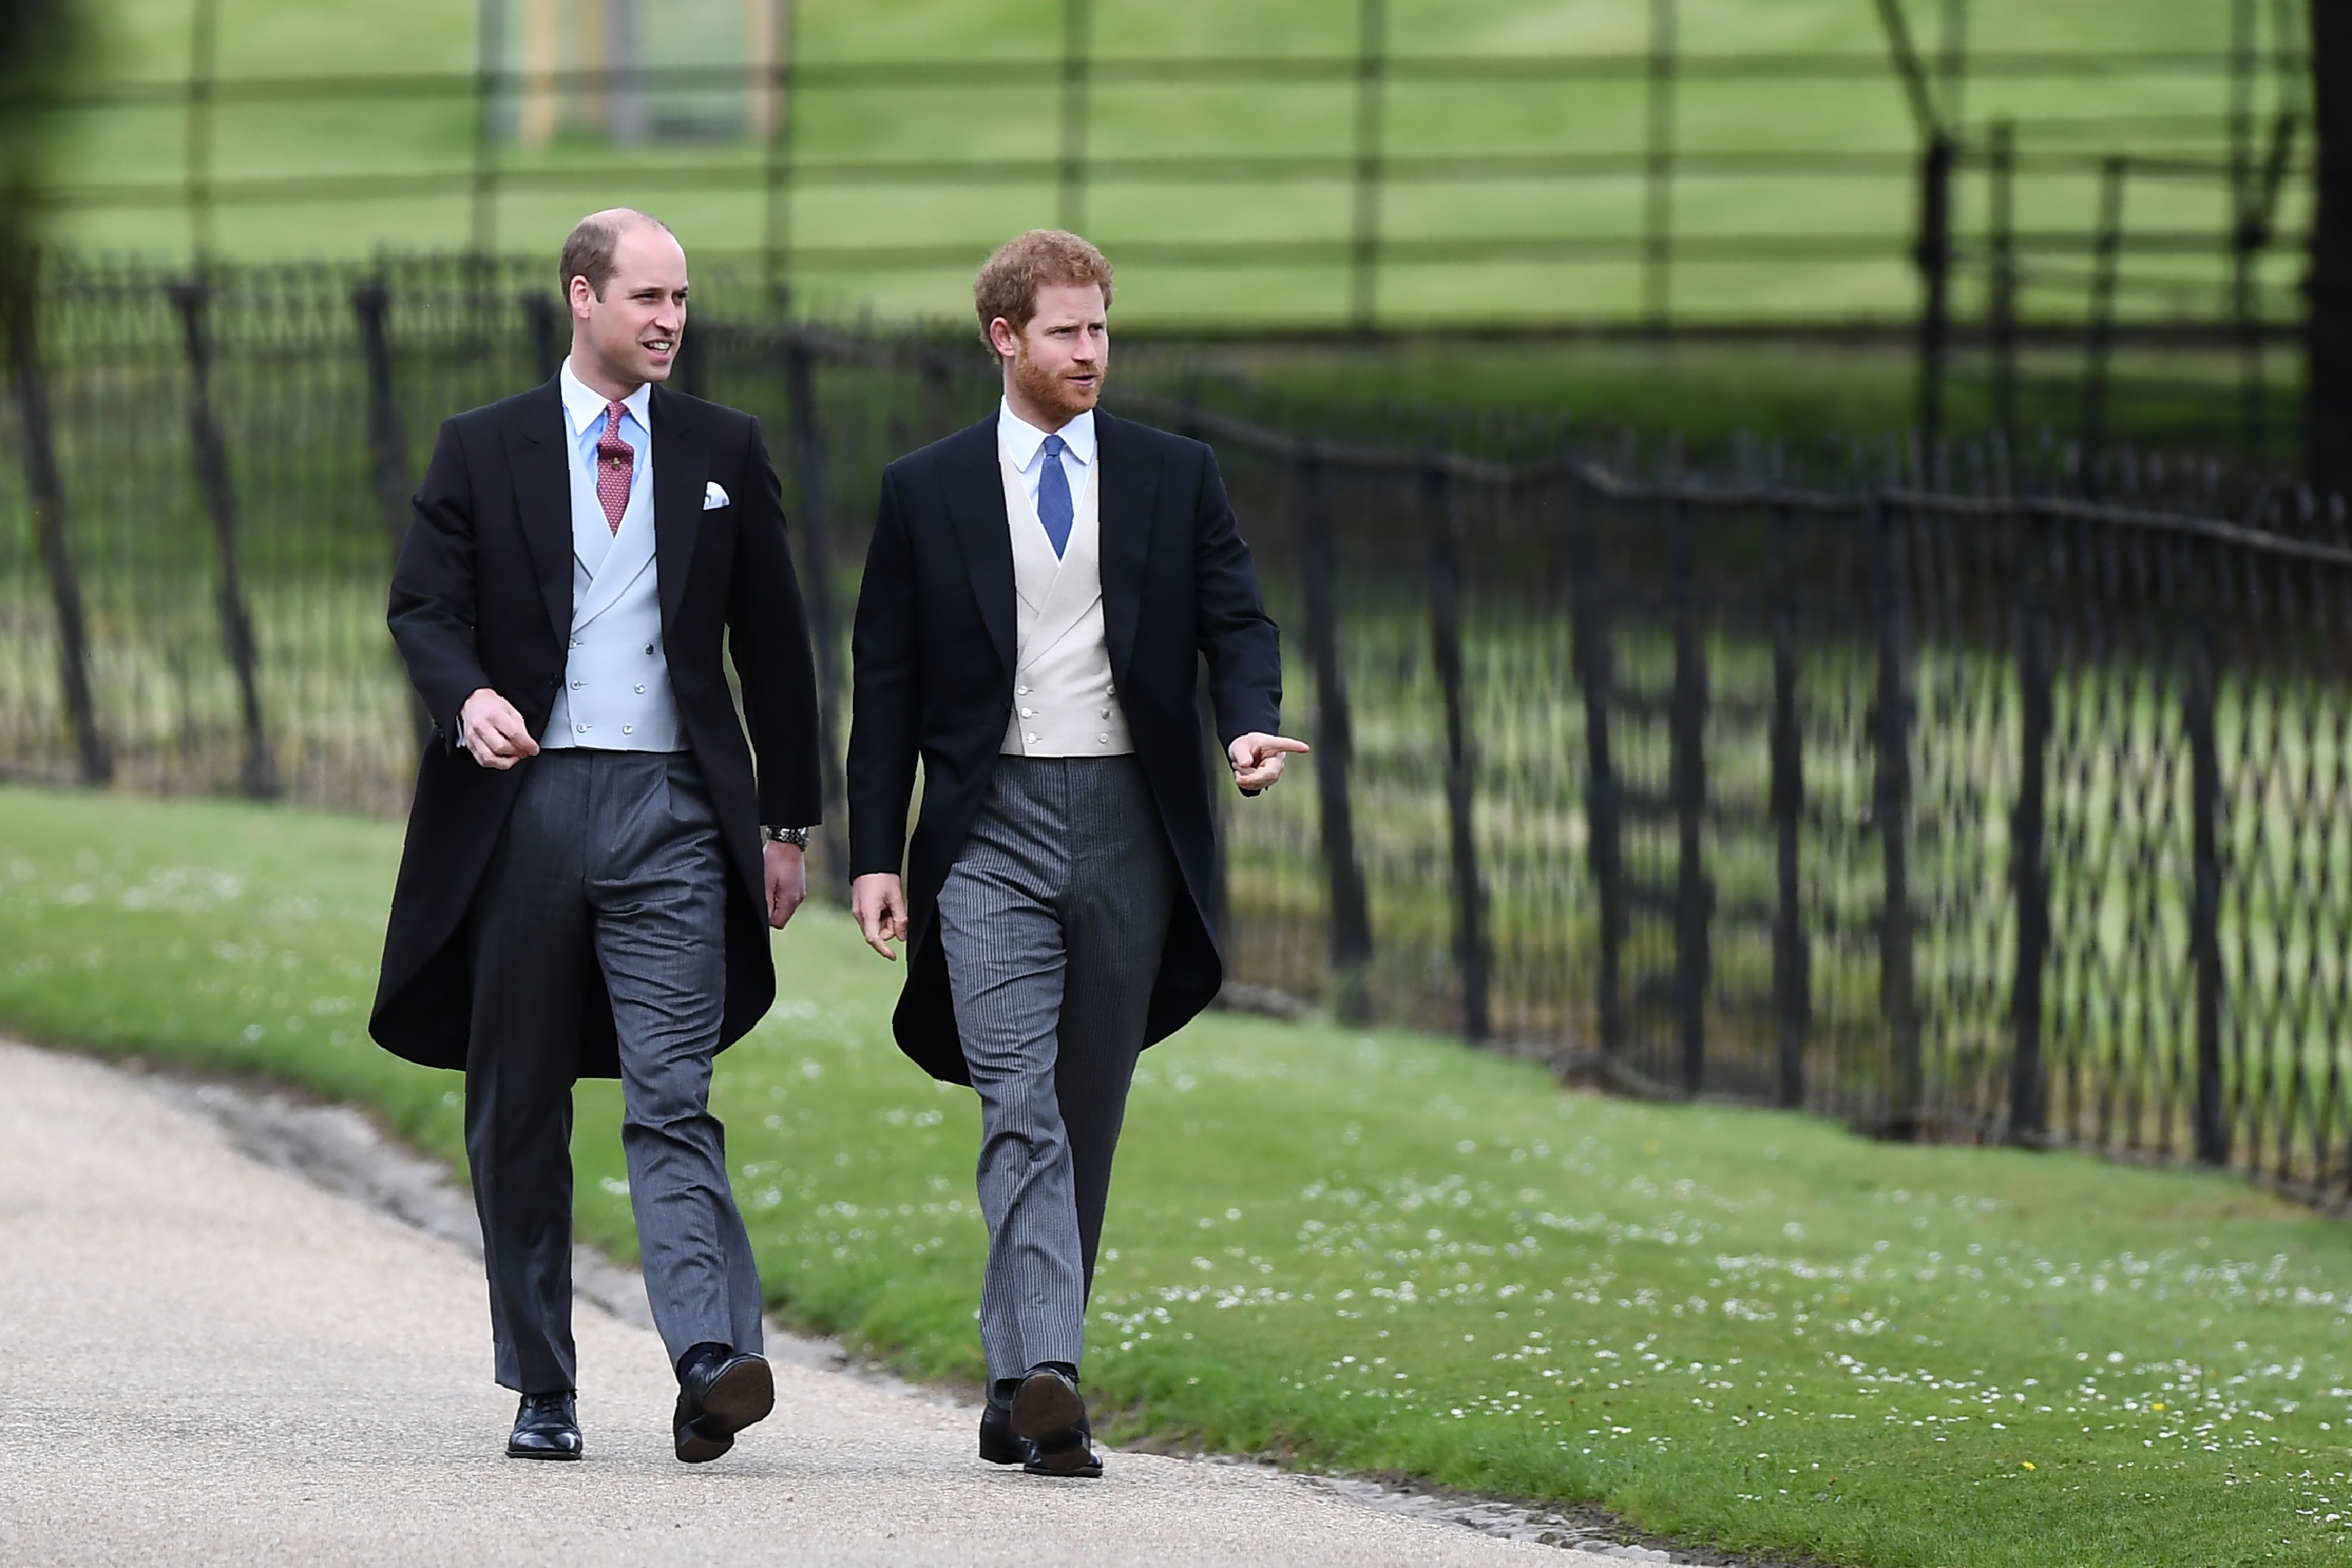 Britain's Prince Harry (R) and Britain's Prince William, Duke of Cambridge attend the wedding of Pippa Middleton and James Matthews at St Mark's Church on May 20, 2017 in Englefield Green, England. (WPA Pool—Getty Images)